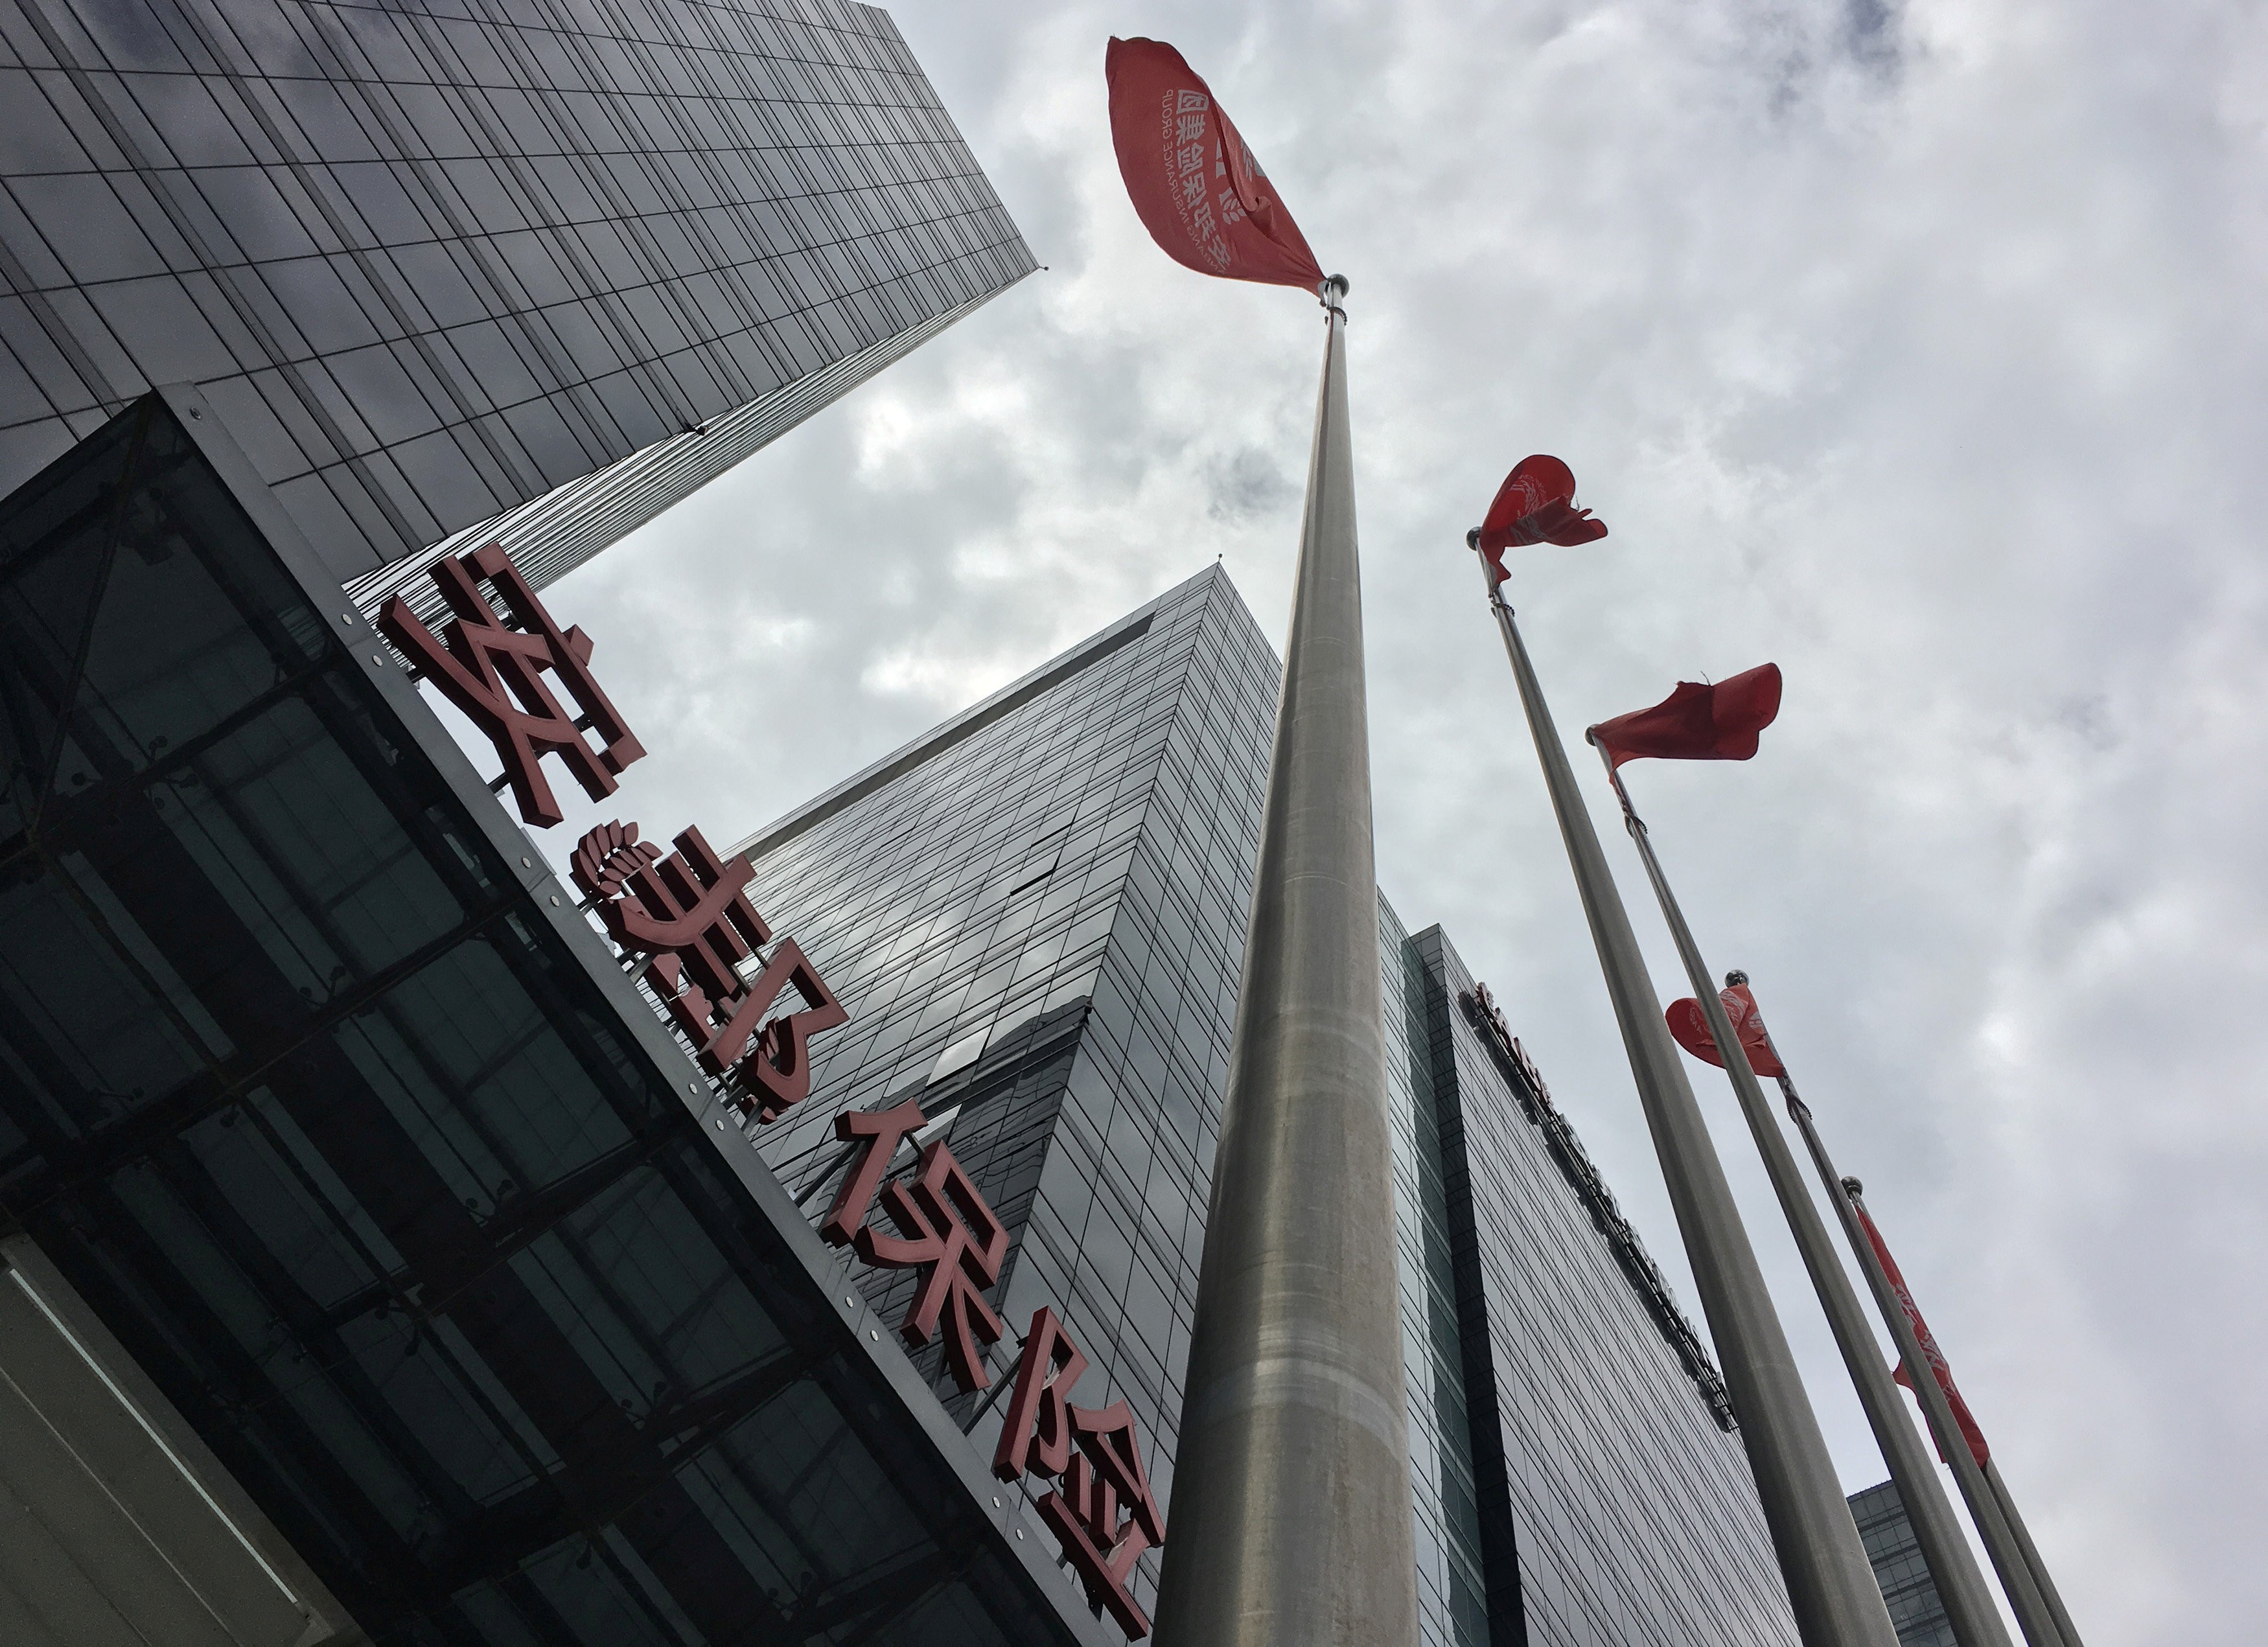 Anbang Insurance Group, one of China’s most aggressive shoppers overseas, has come under Beijing’s scrutiny. Photo: Reuters